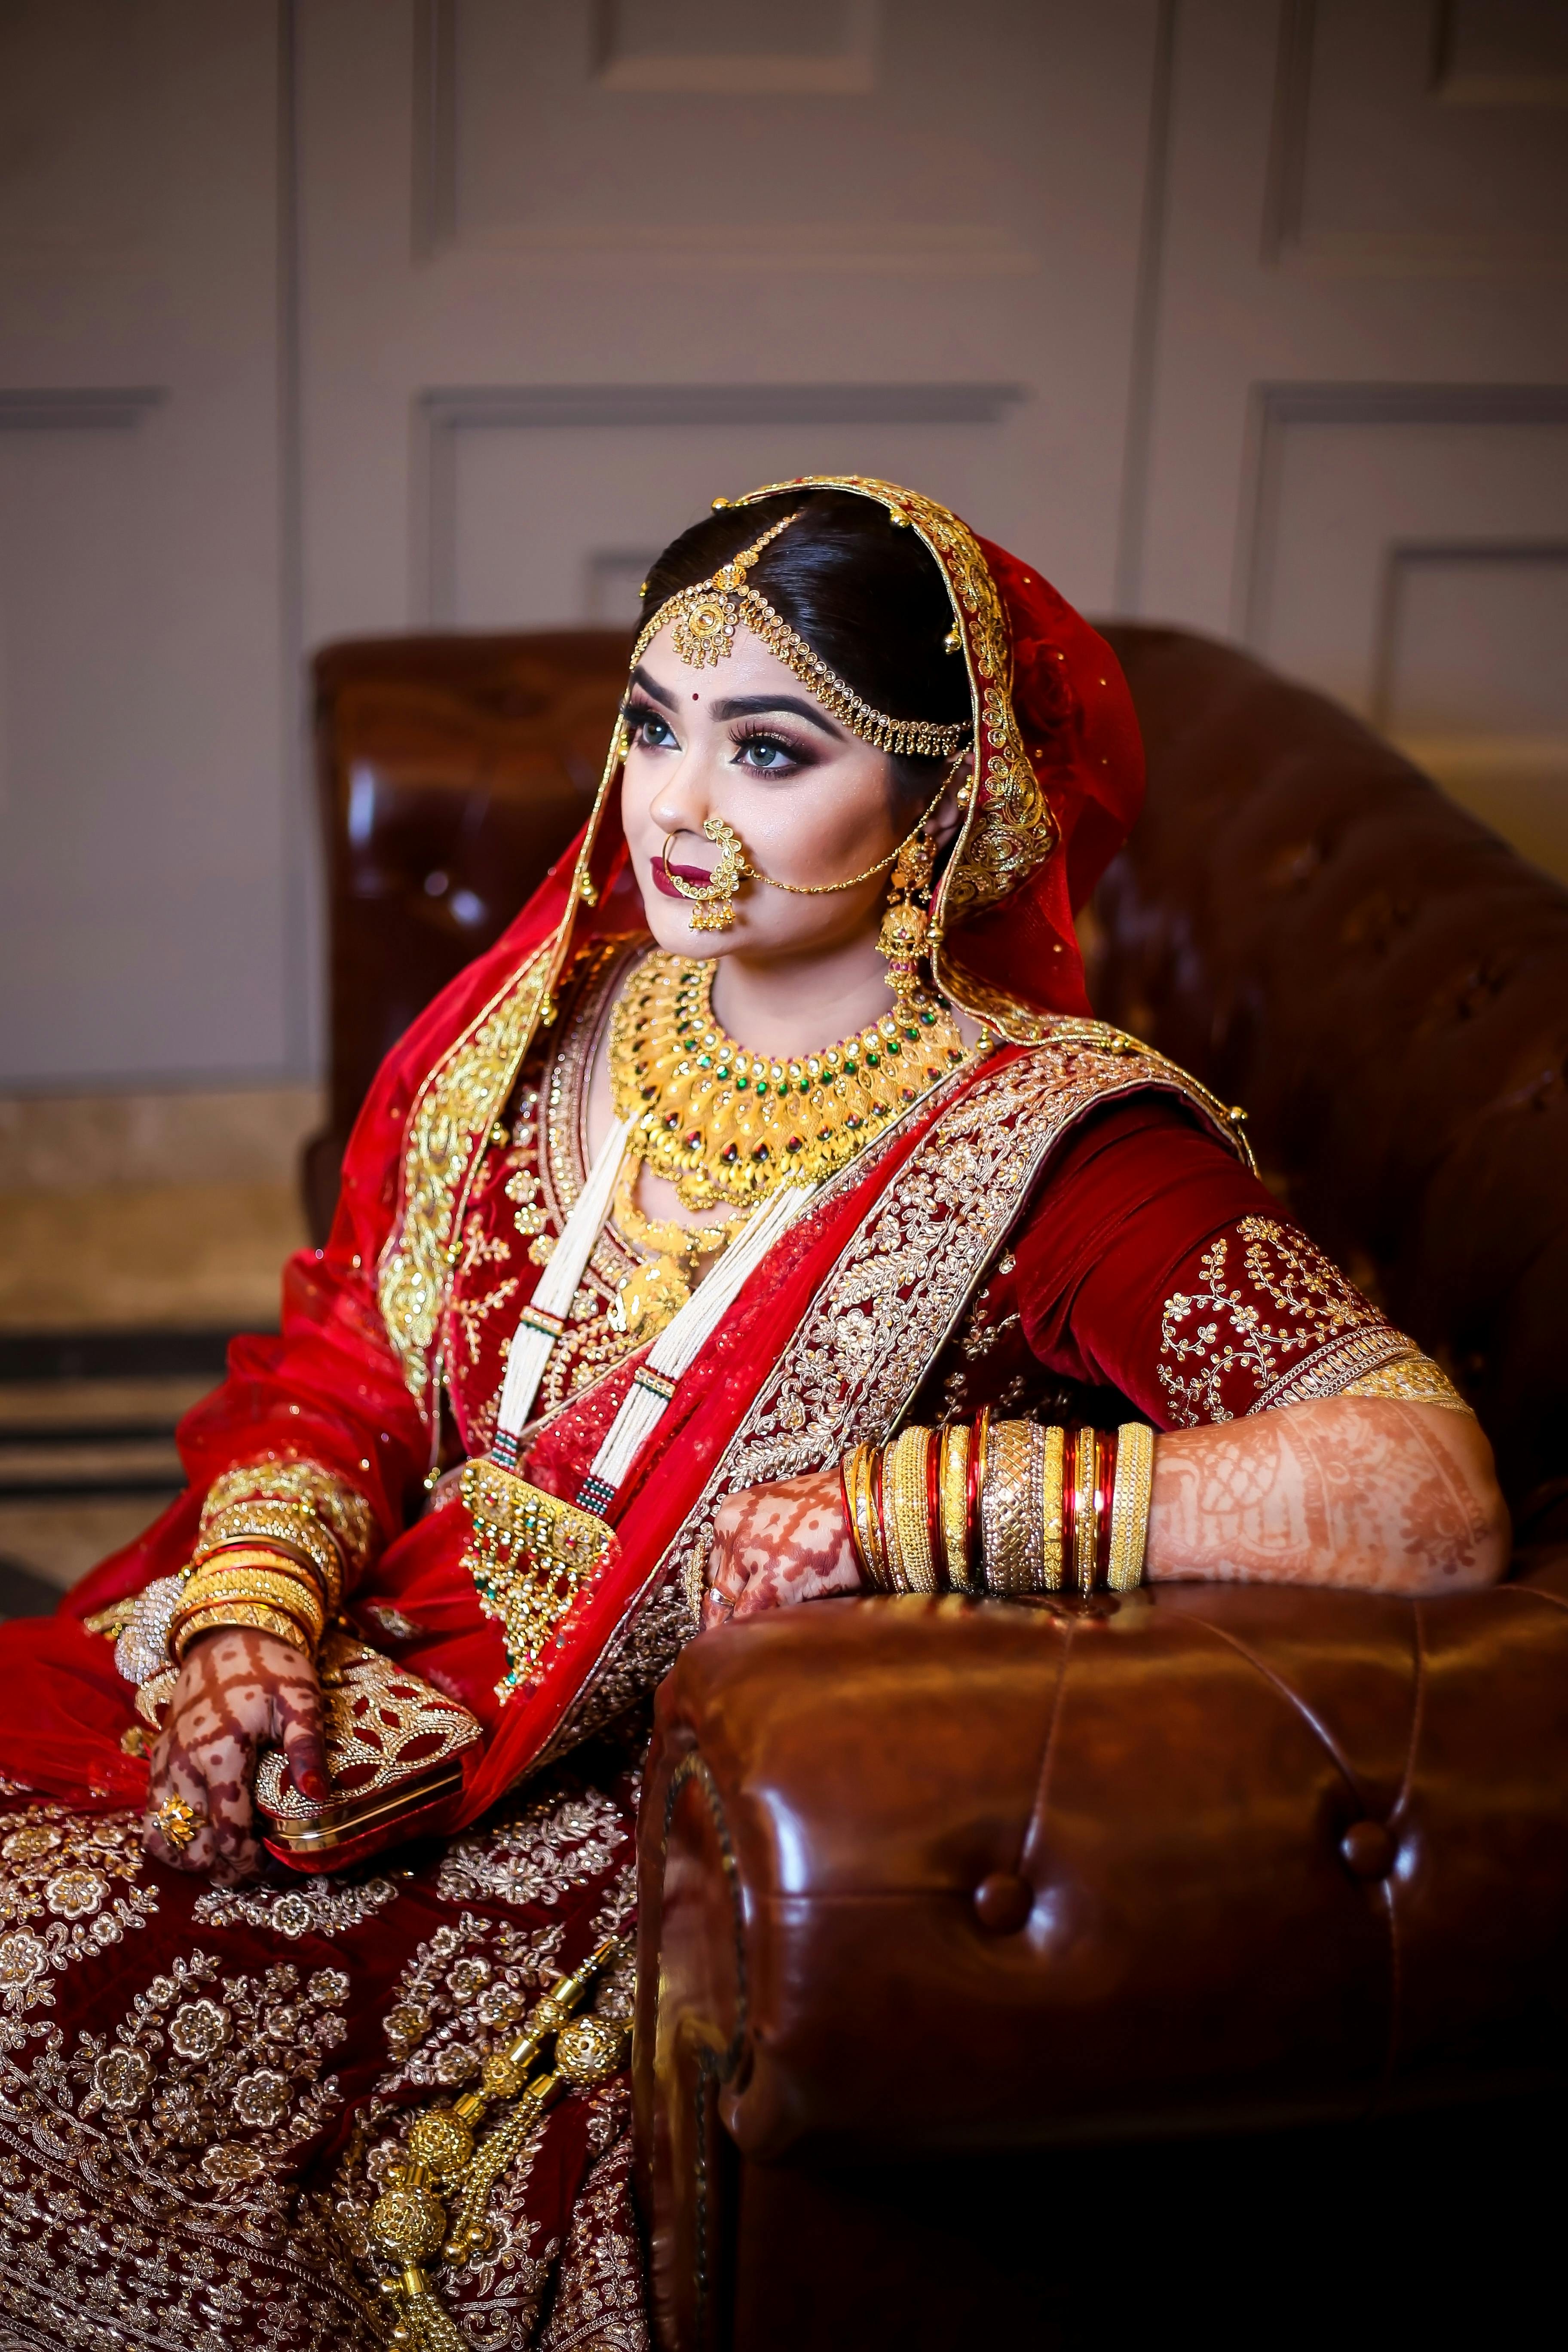 getting married, mr & mrs. dulhan dulha bride and groom | Indian wedding  couple photography, Bridal photography poses, Indian wedding photography  poses